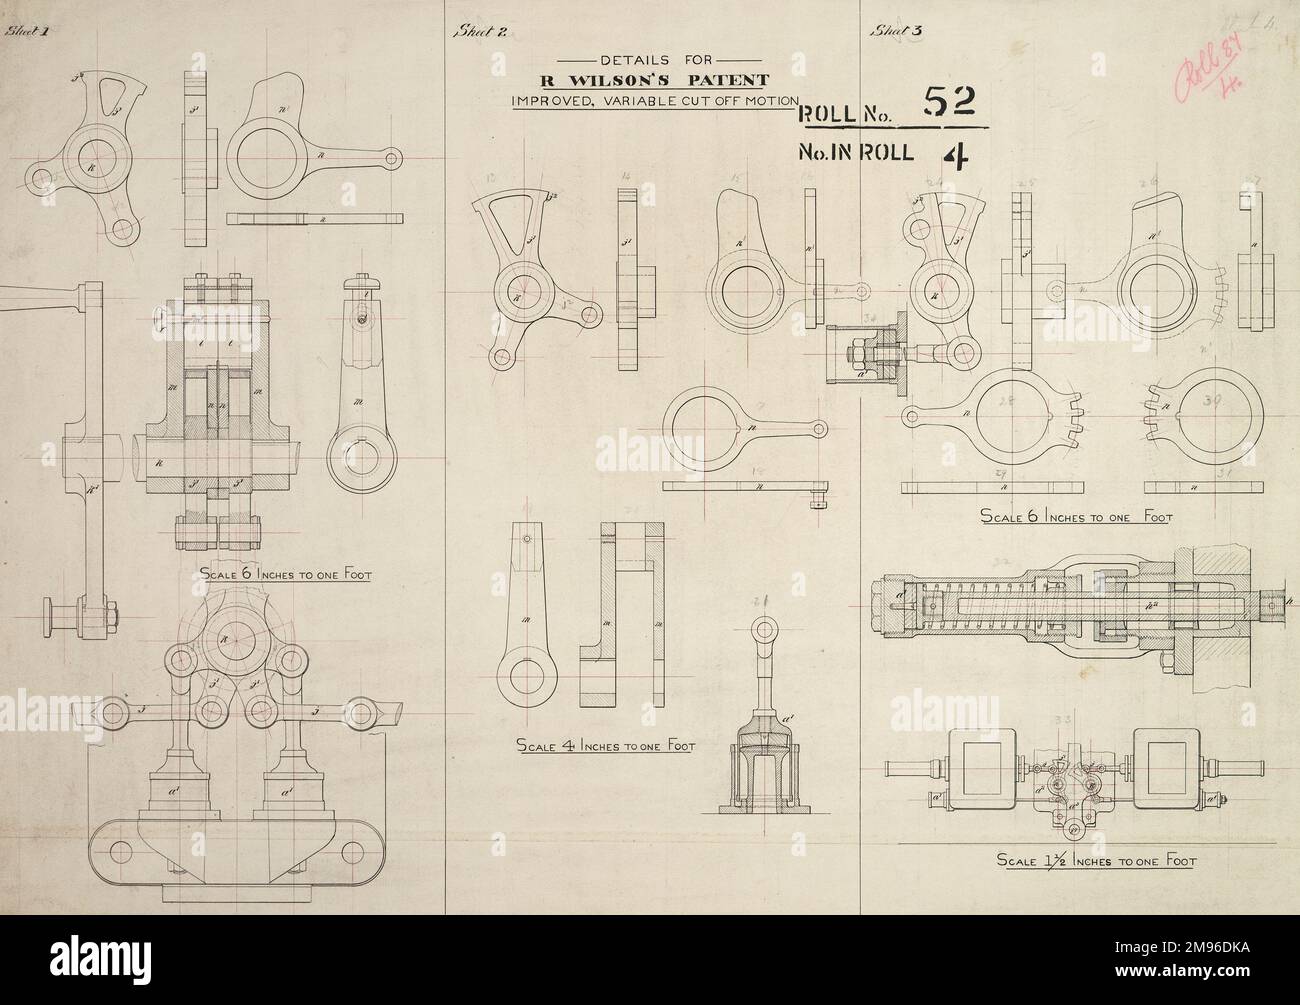 Details for R Wilson's patent improved variable cut off motion Stock Photo